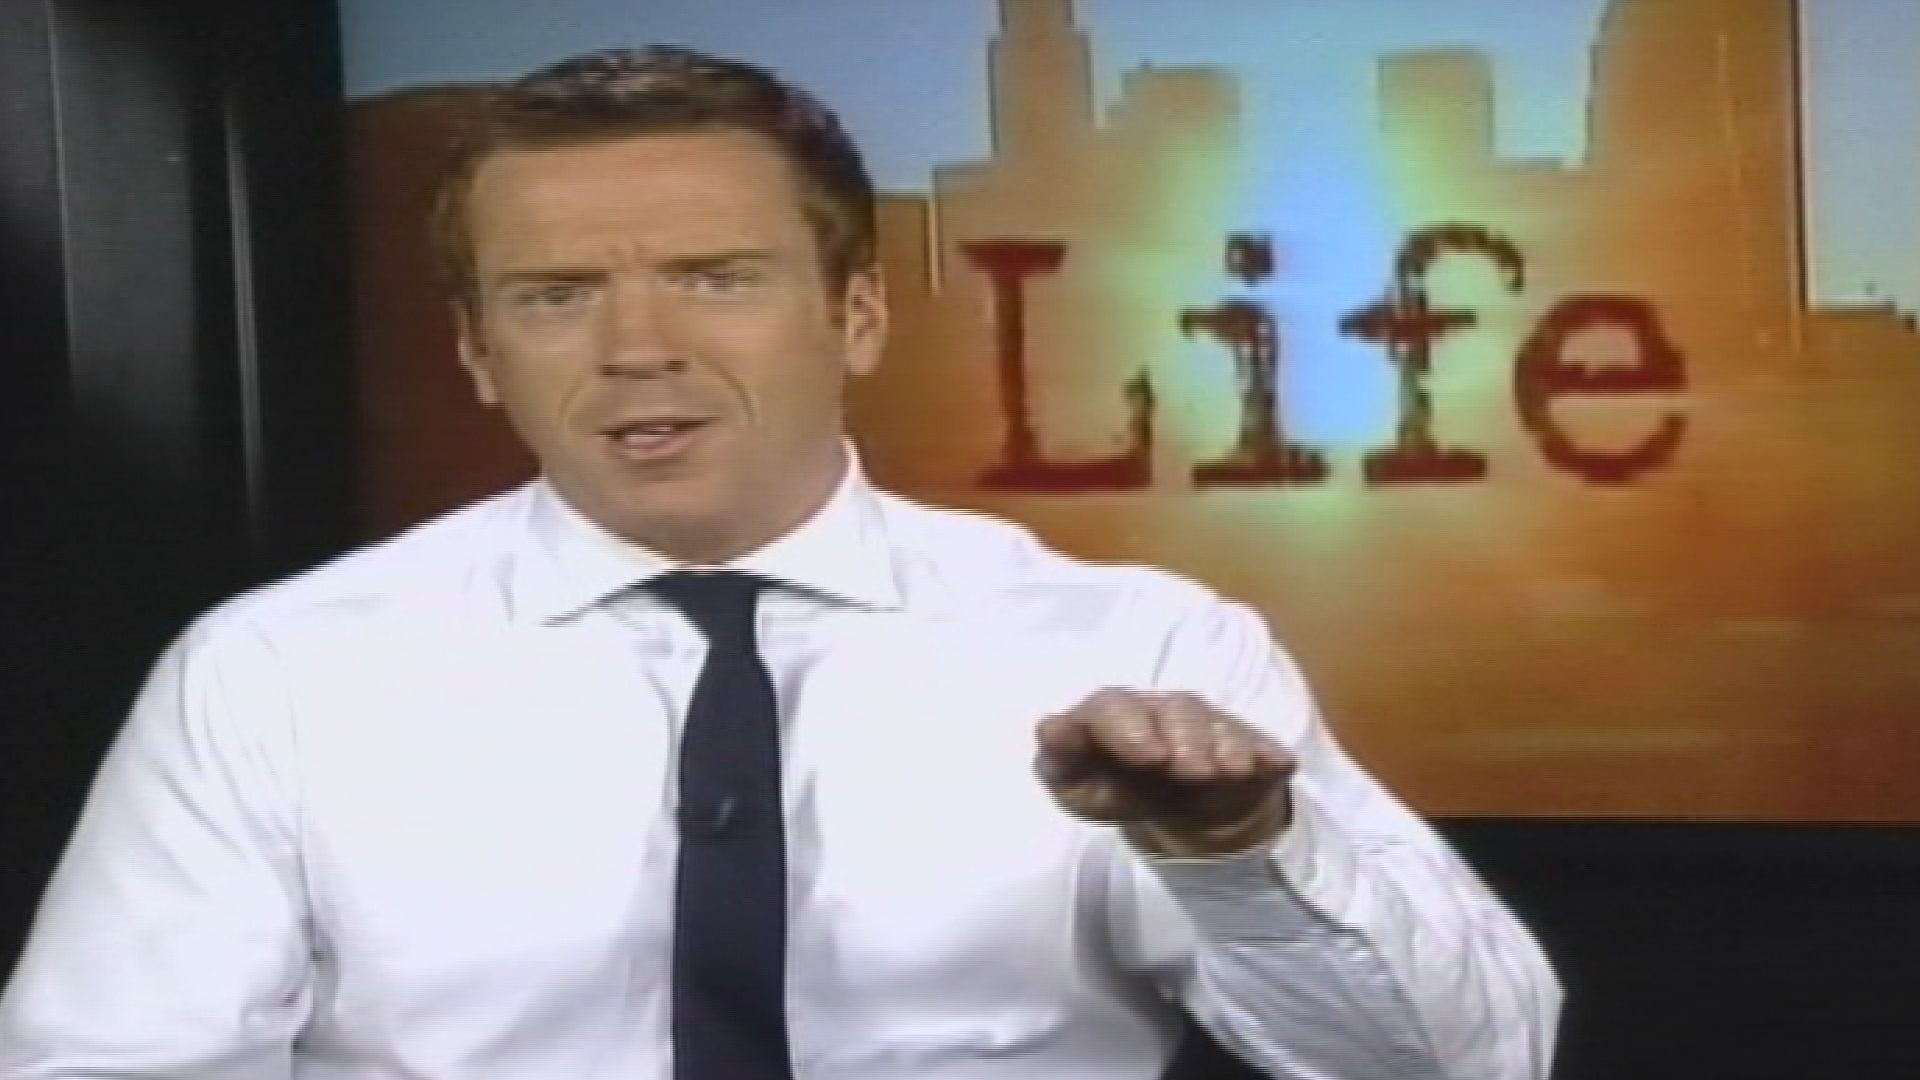 Damian Lewis played a character who was haunted by his past on "Life," but as he told 207 in October 2008, his own childhood was full of happy memories of Maine.